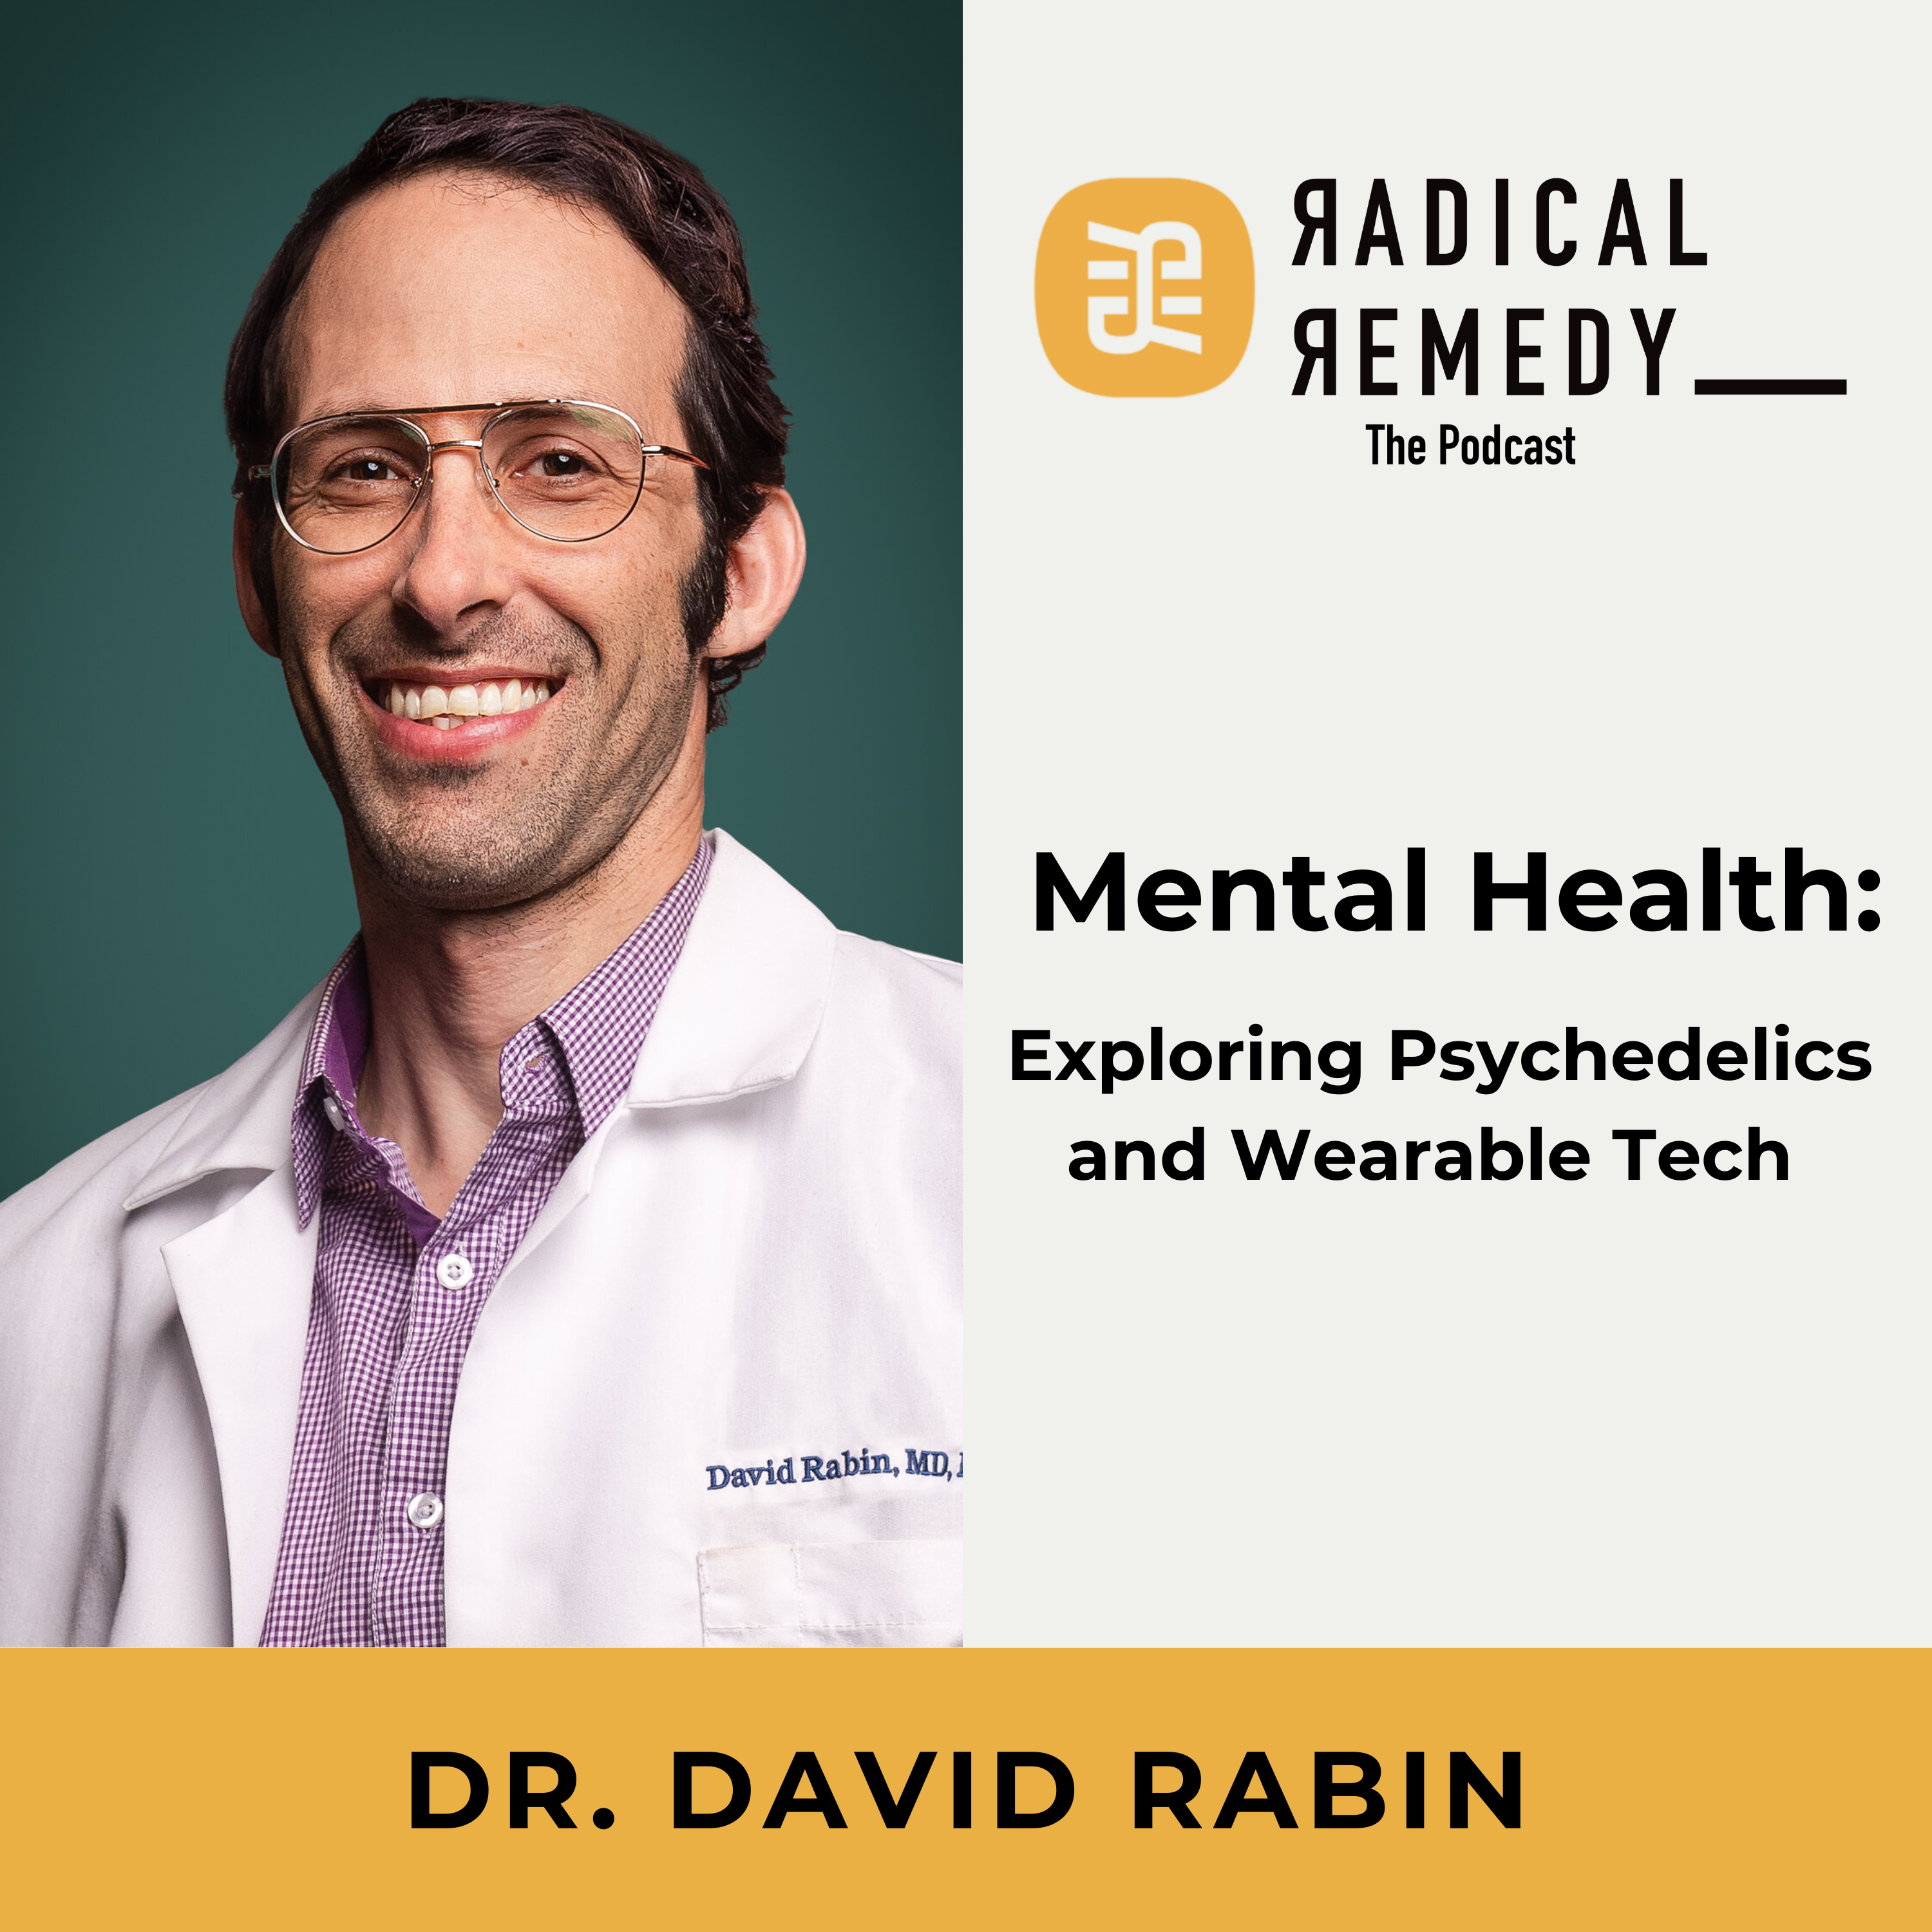 Dr. David Rabin mental health specialist. using psychedelics and wearable technology